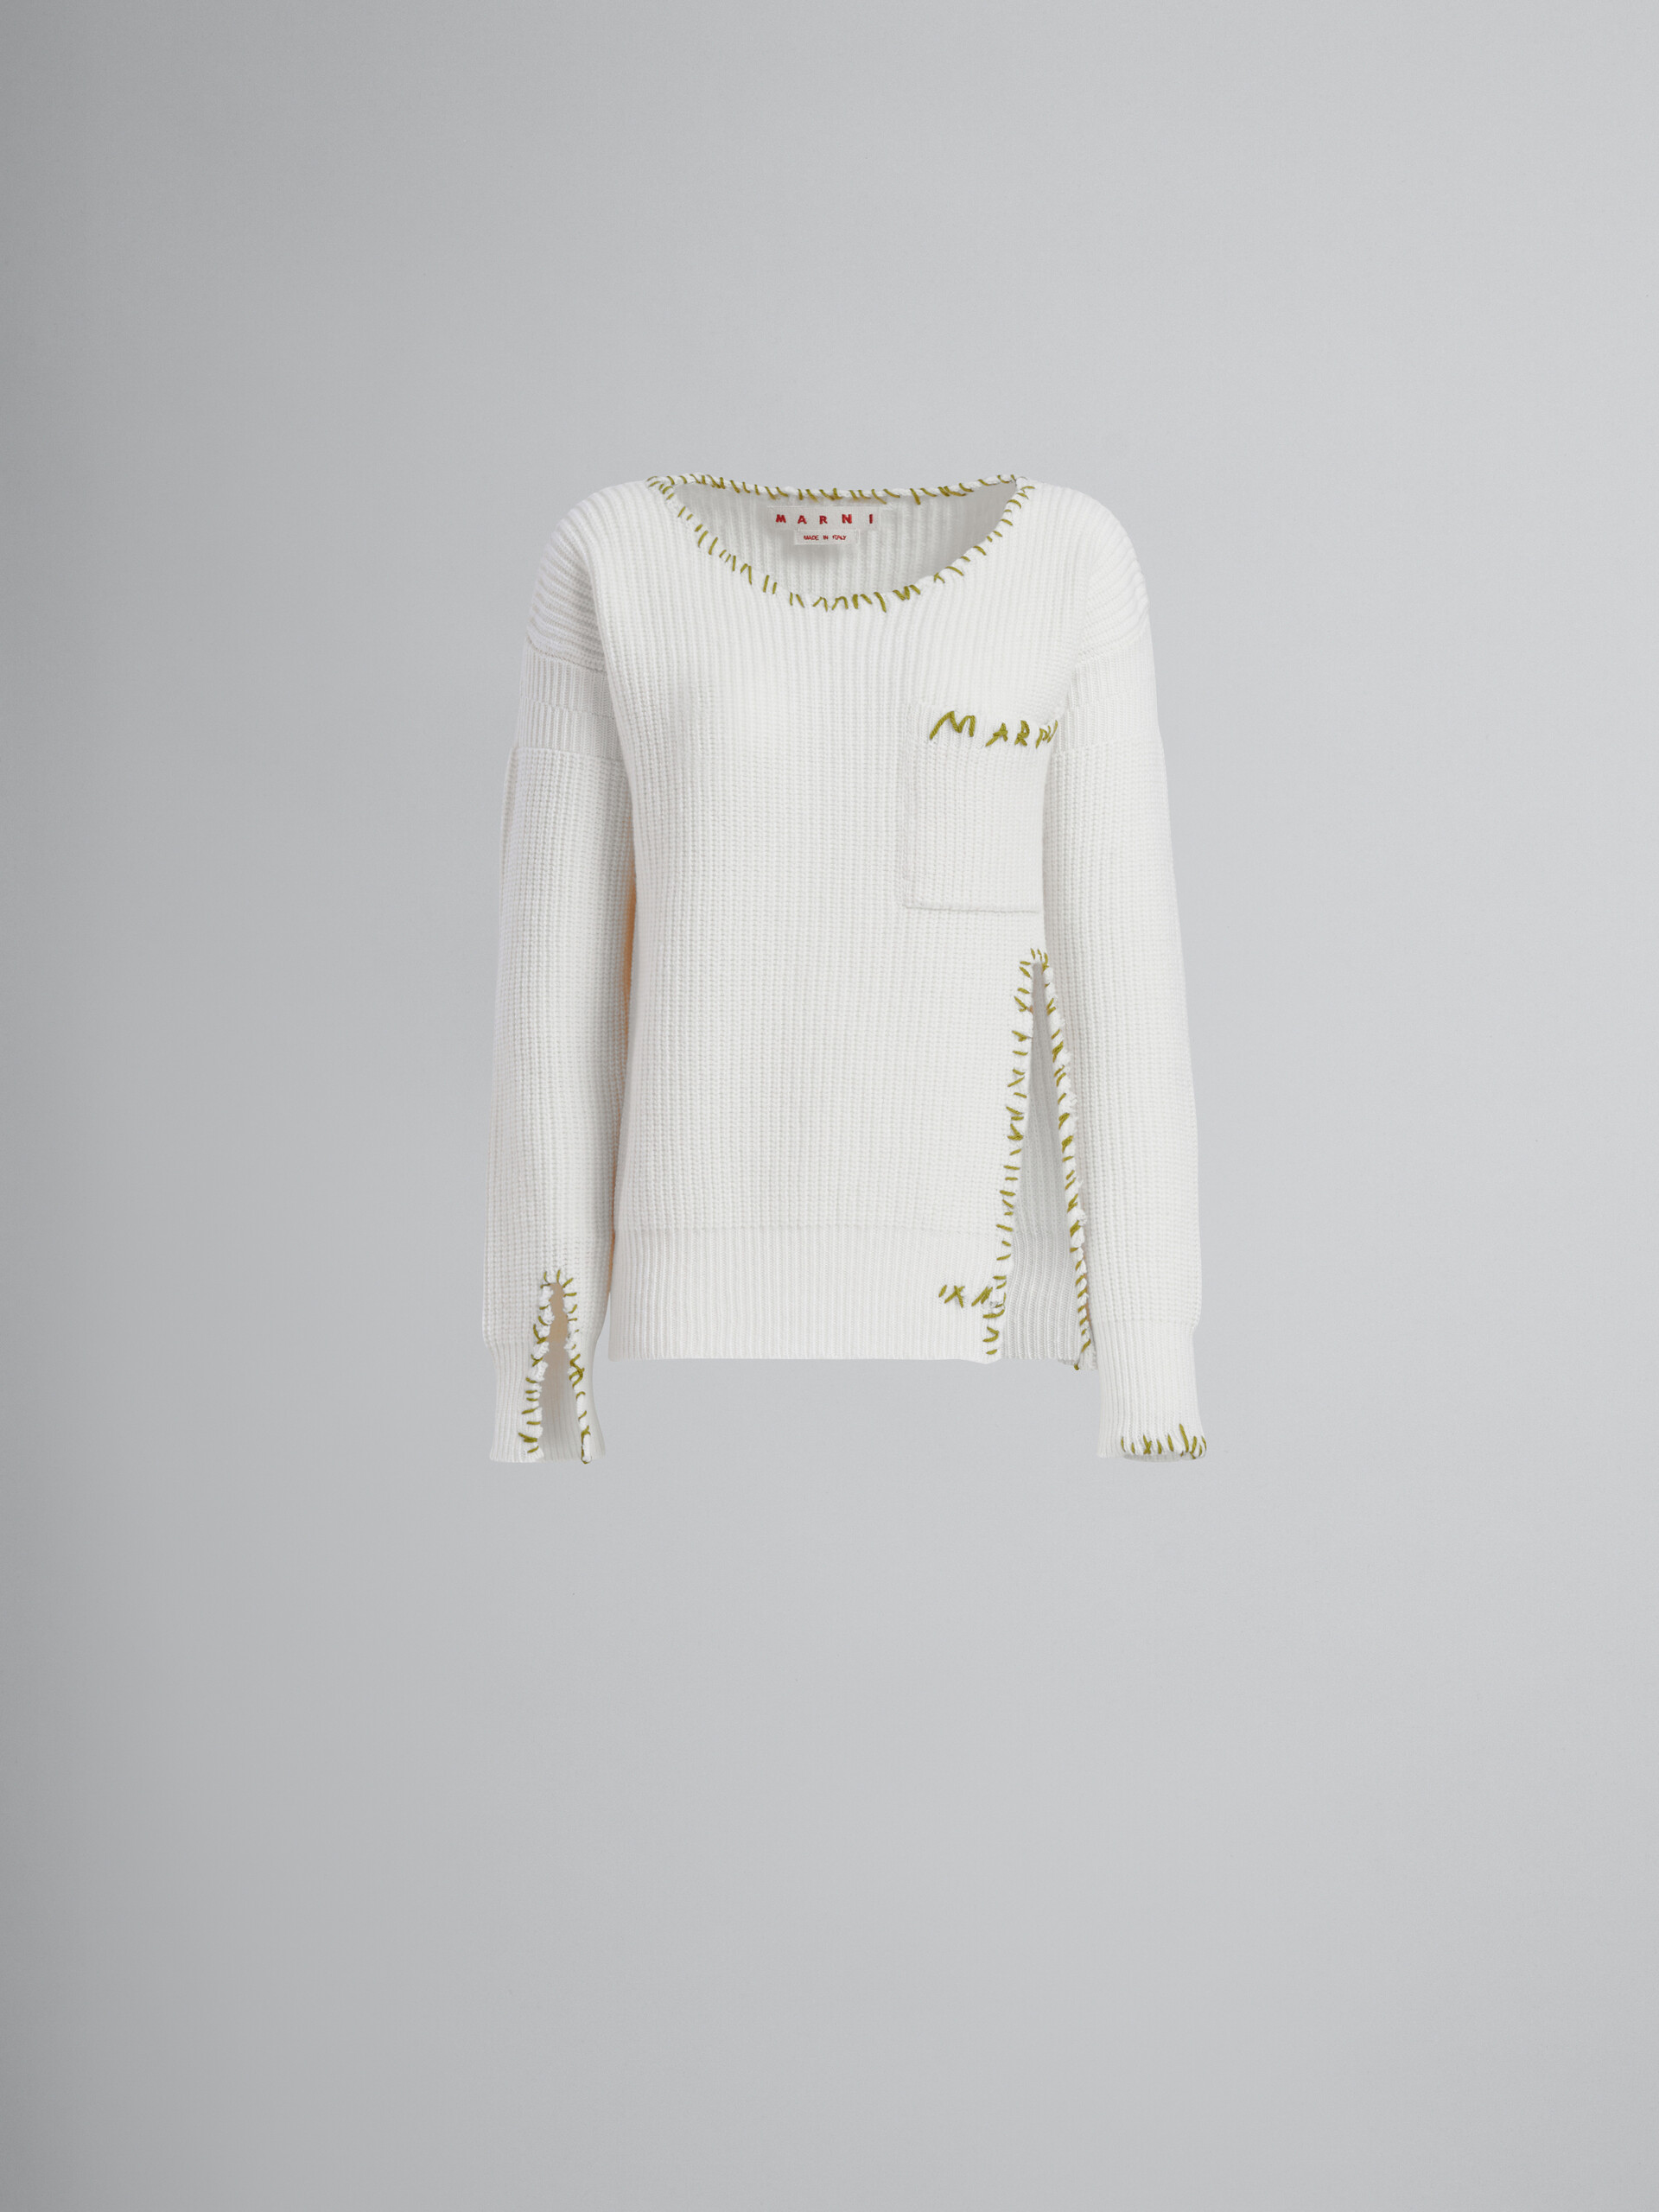 White wool sweater with raw-edge detailing - Pullovers - Image 1